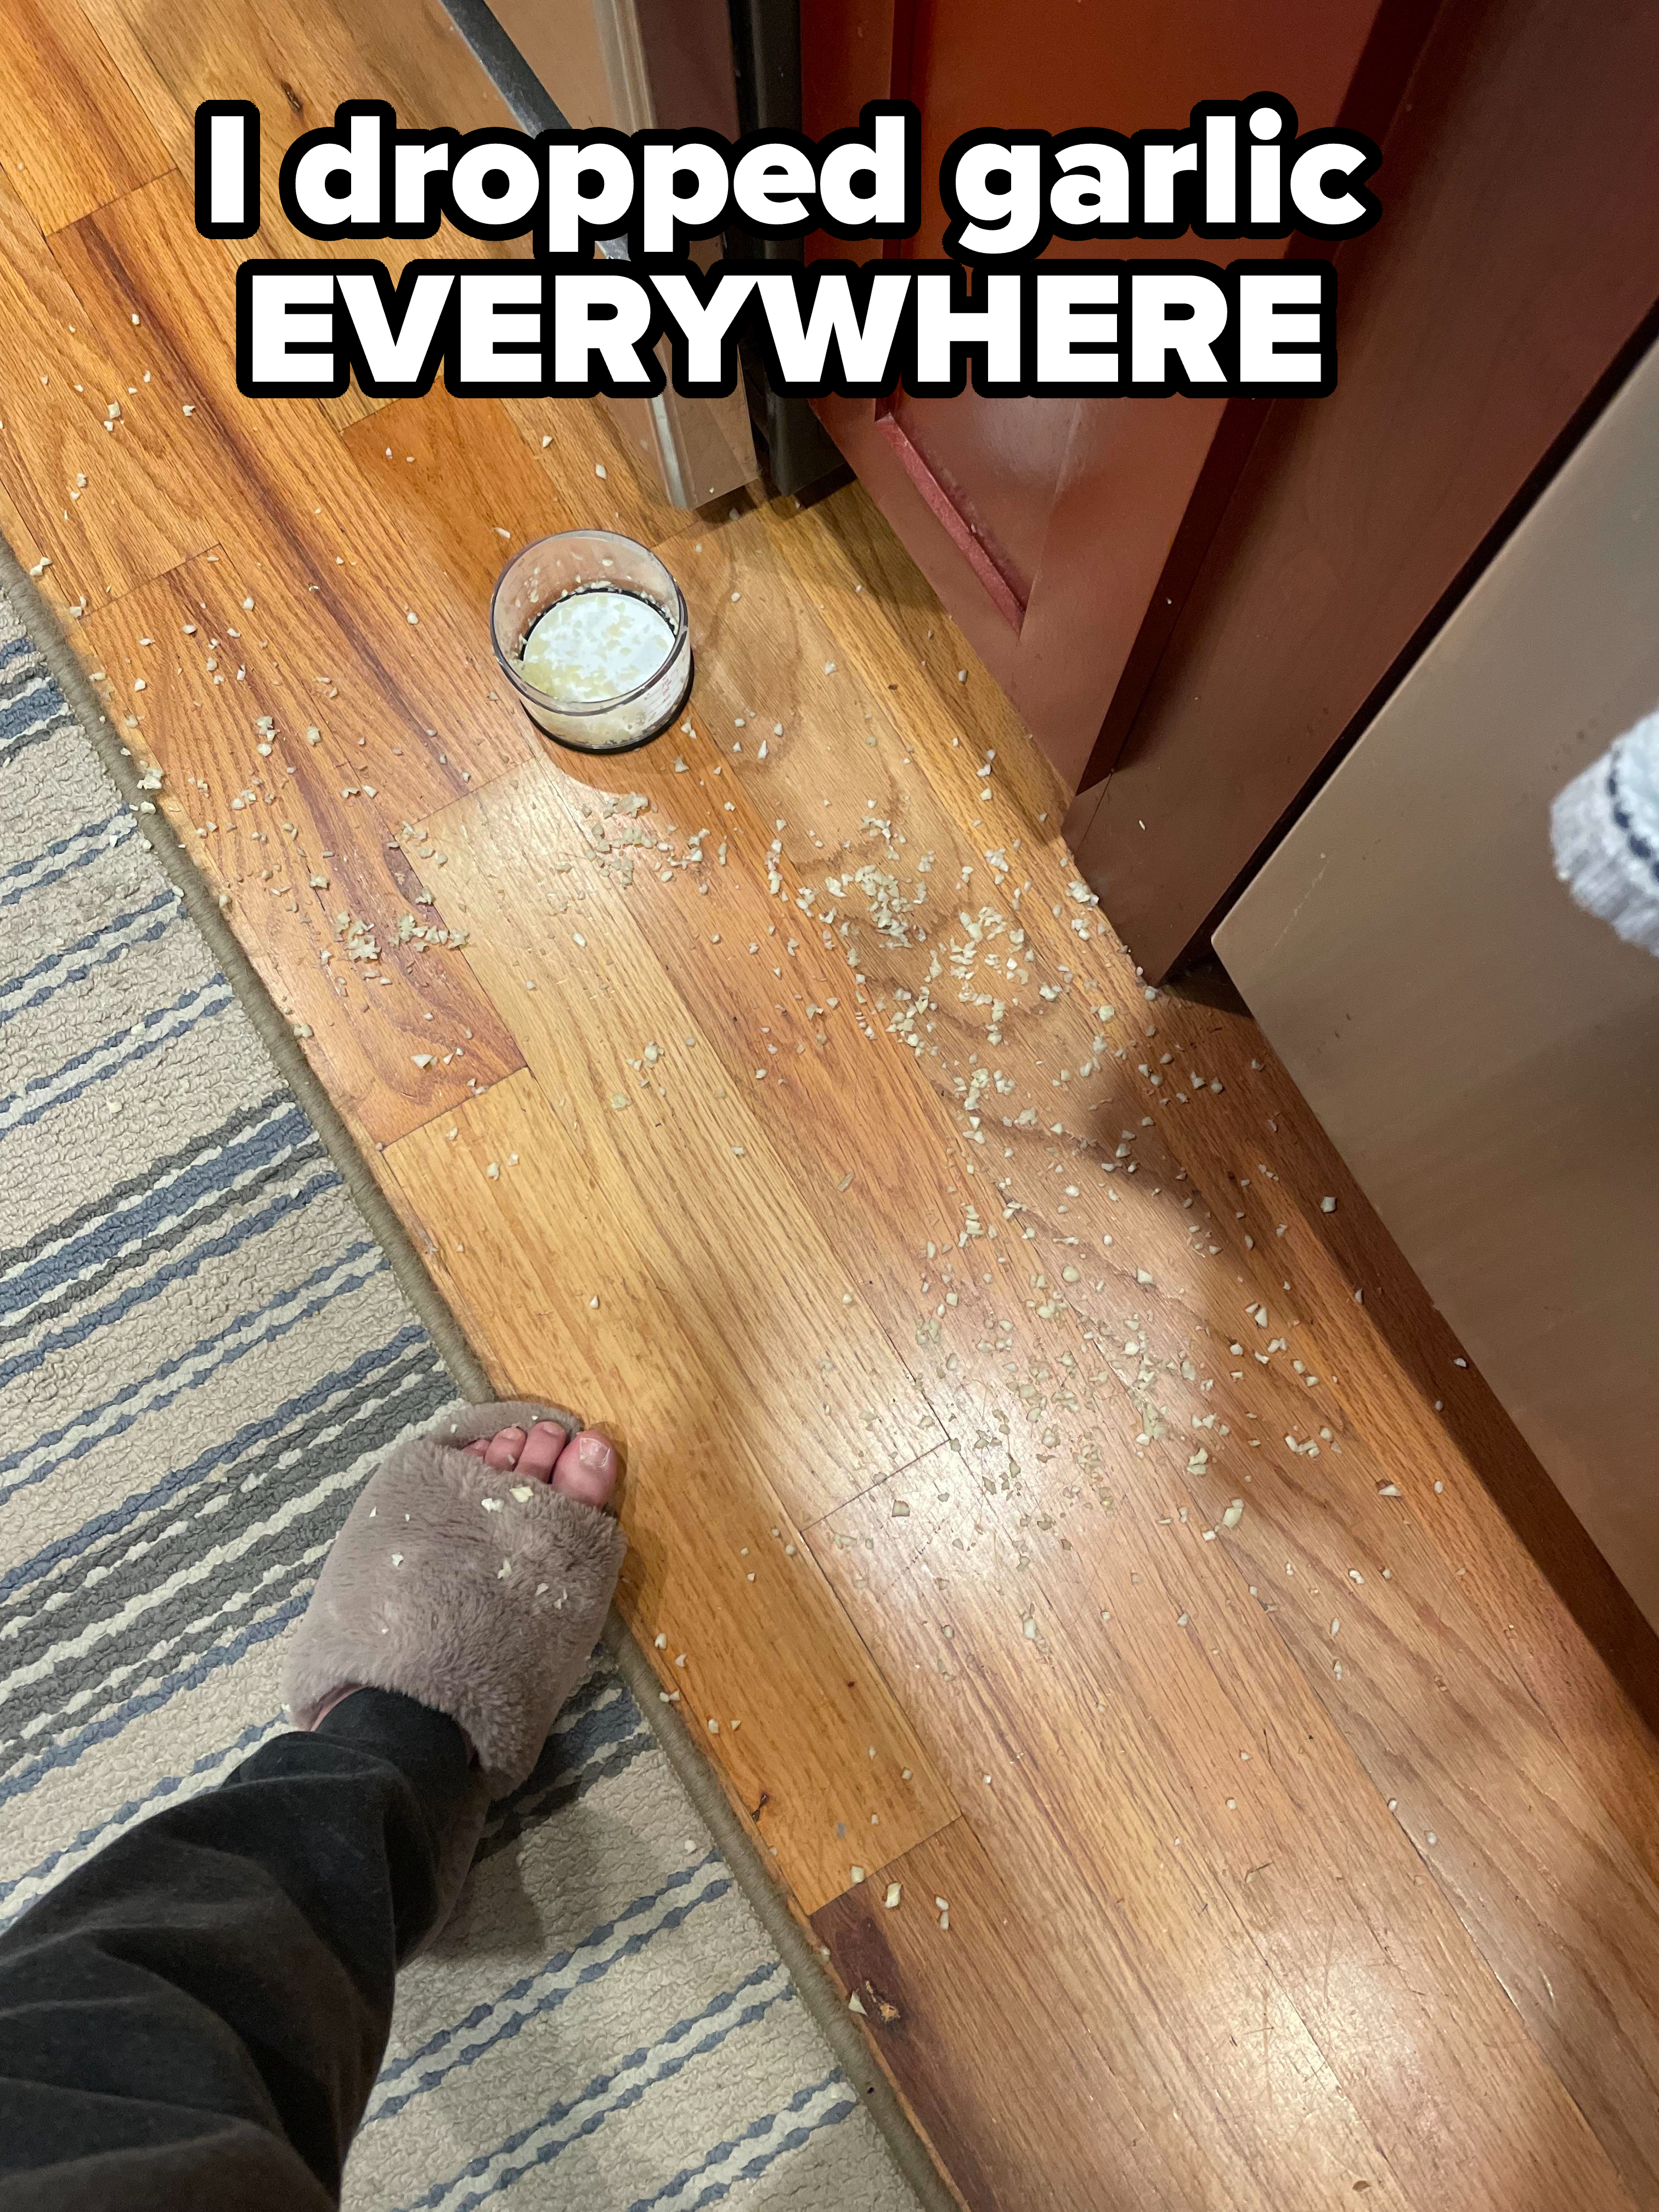 &quot;I dropped garlic EVERYWHERE.&quot;